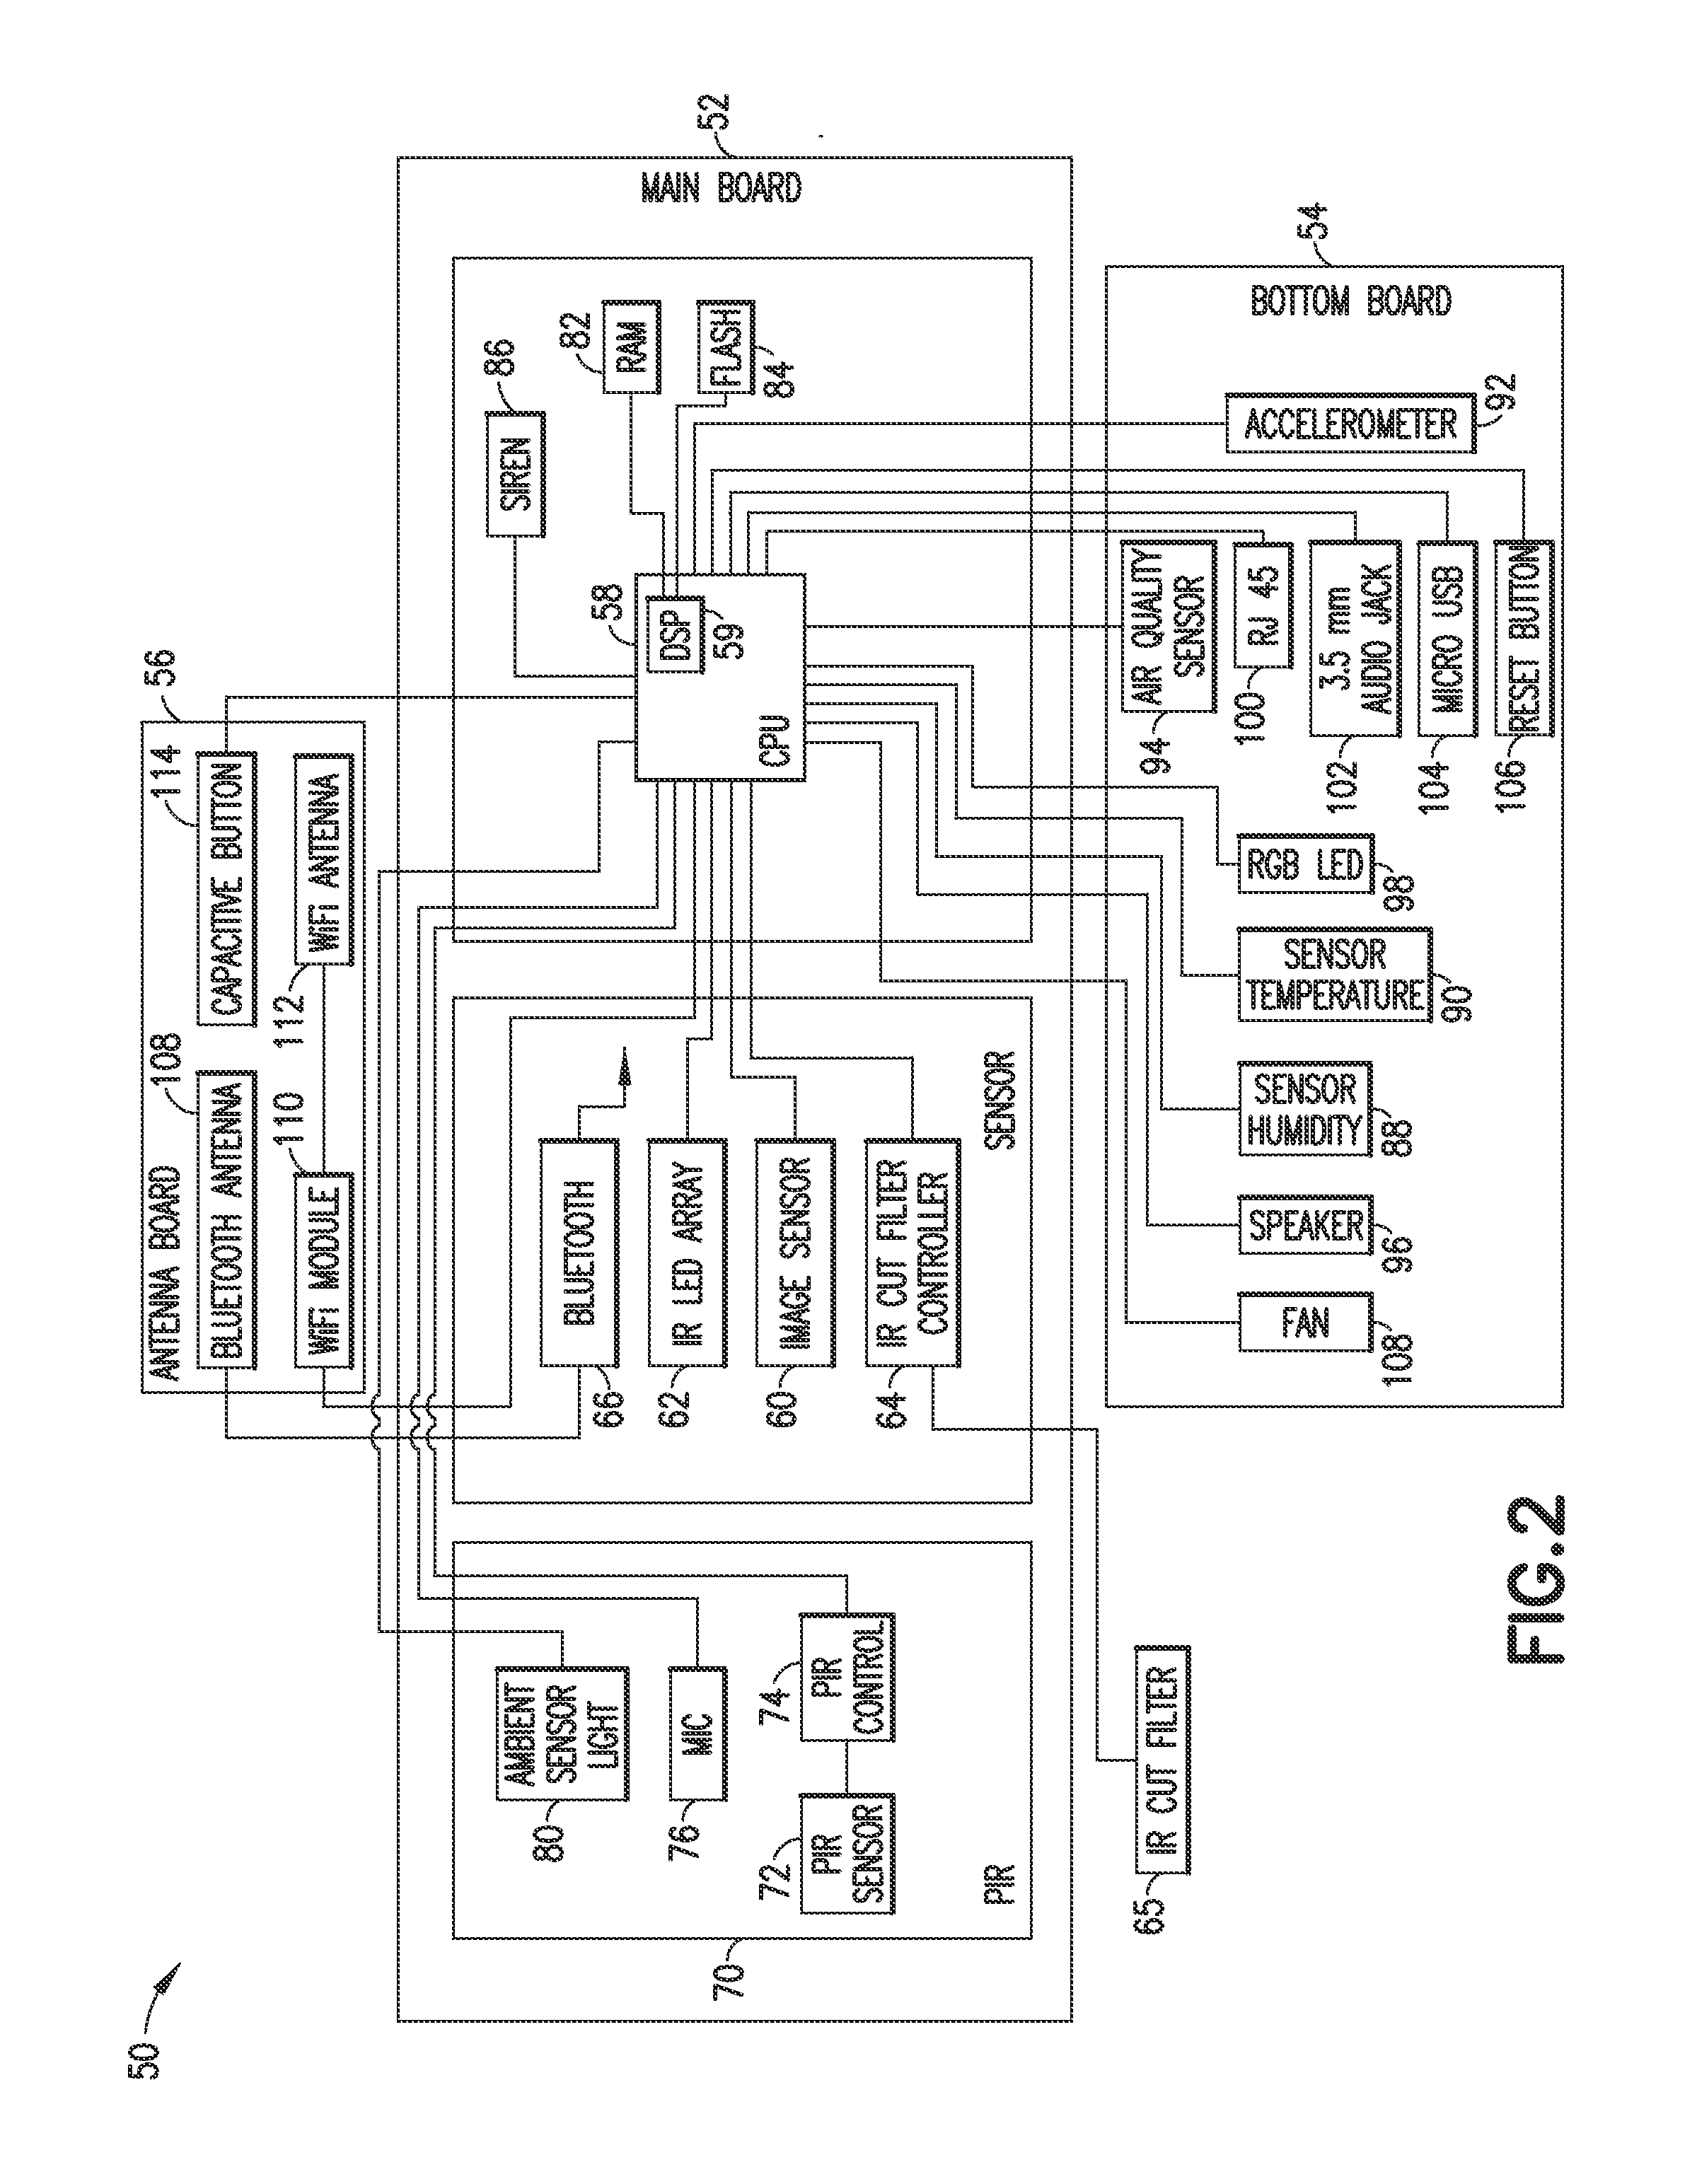 System and methods for designating and notifying secondary users for location-based monitoring